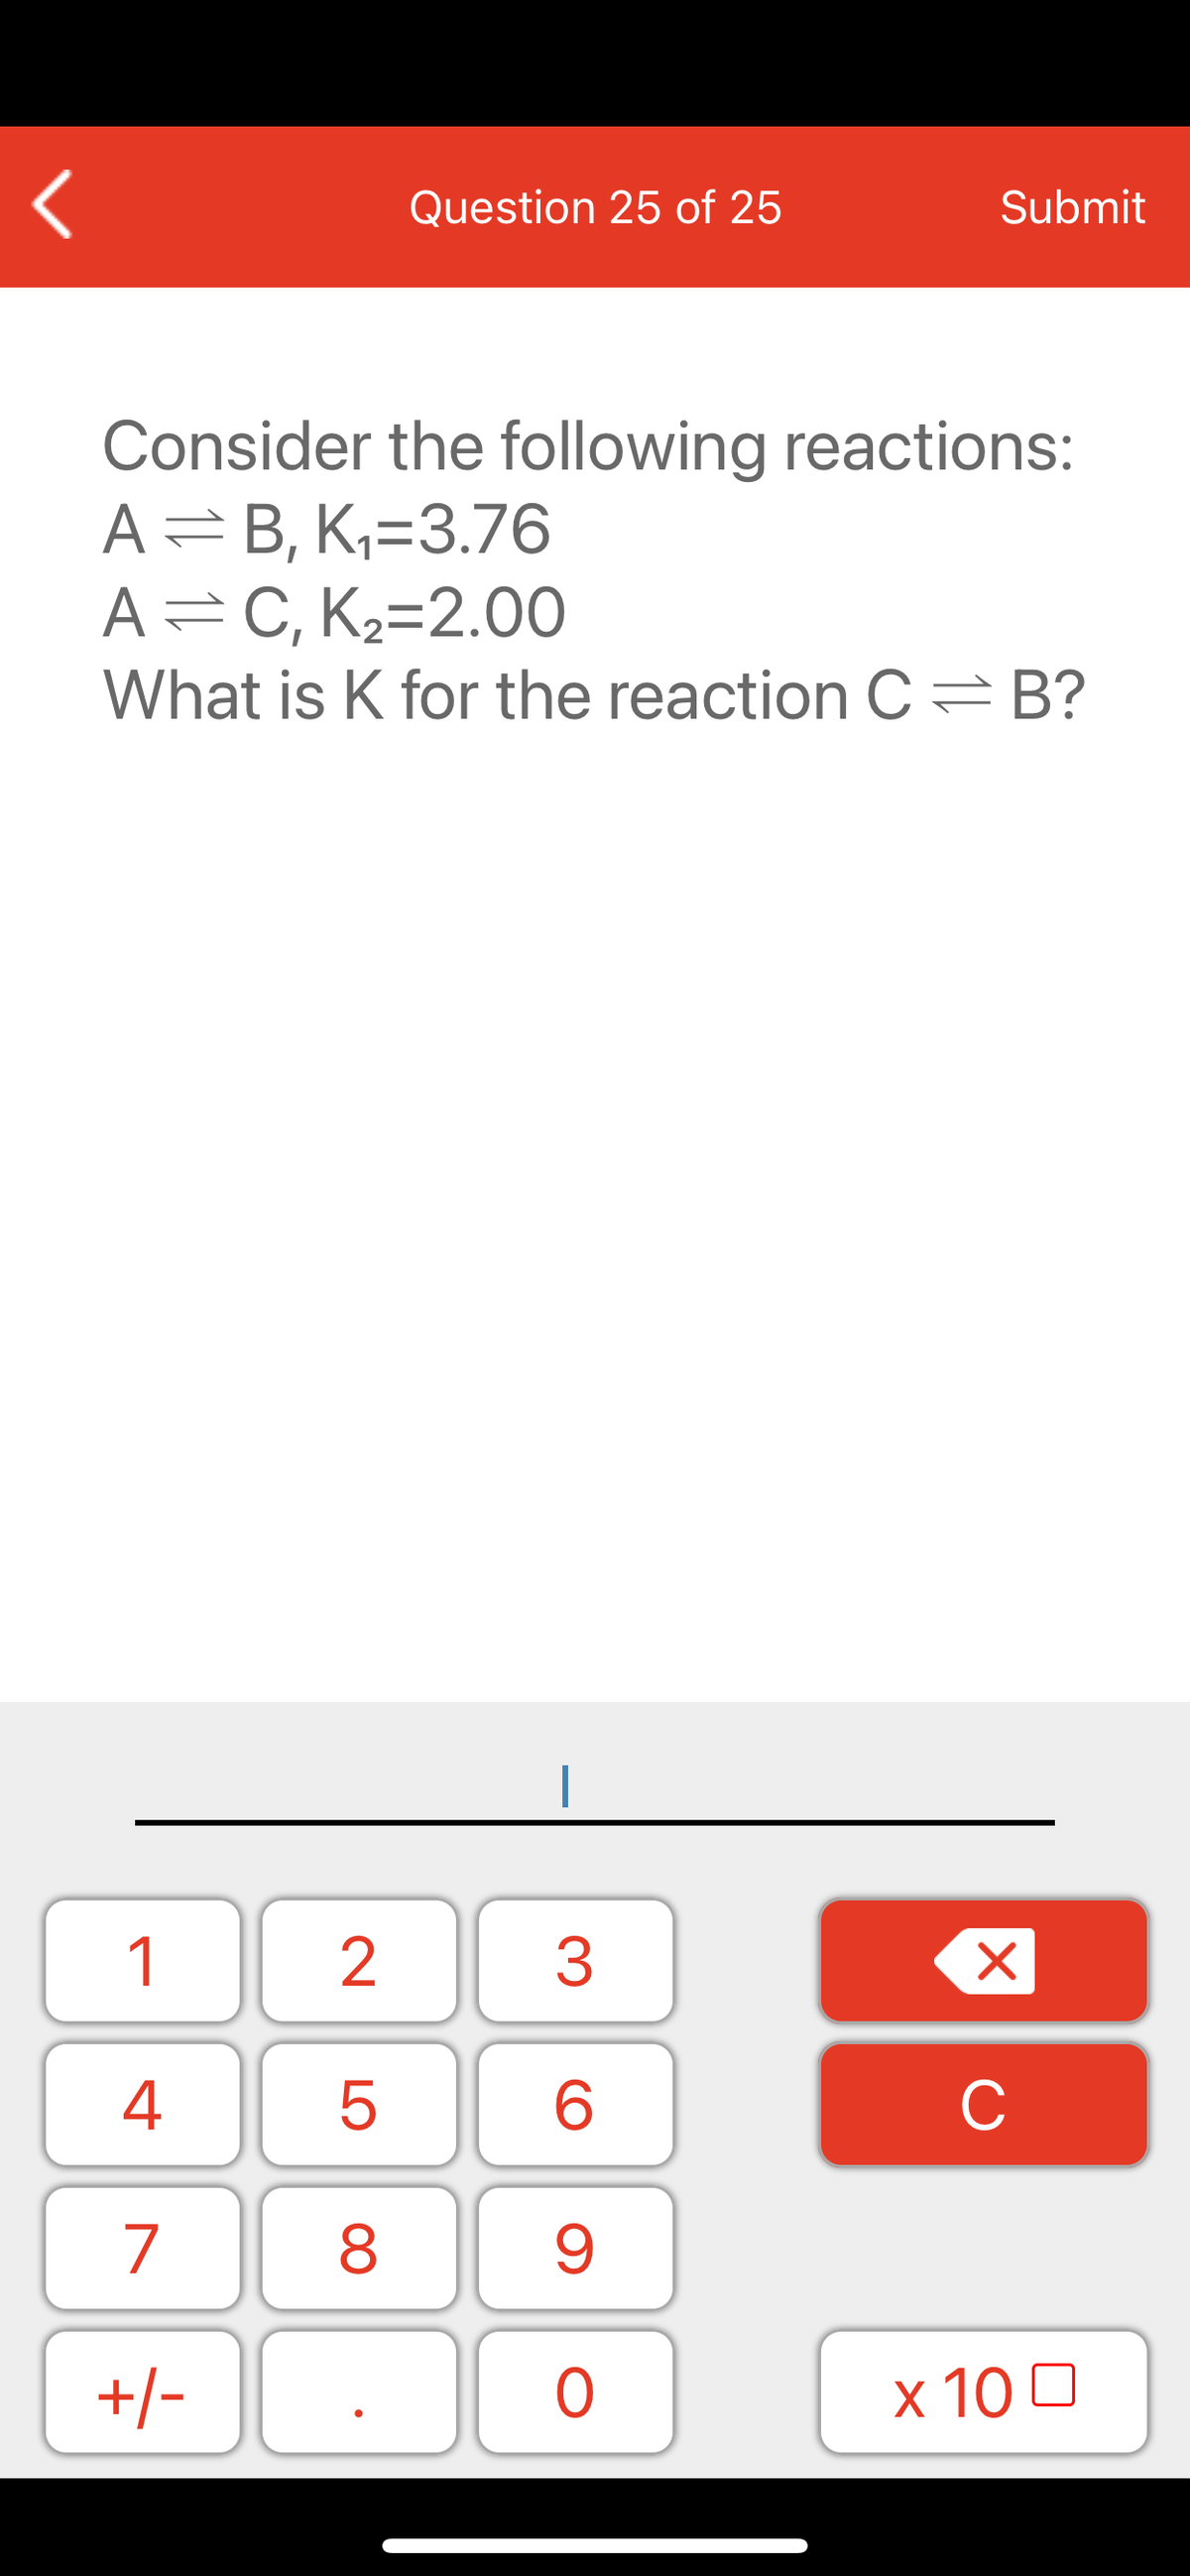 Question 25 of 25
Submit
Consider the following reactions:
A=B, K,=3.76
A=C, K2=2.00
What is K for the reaction C =B?
1
3
C
7
9.
+/-
x 10 0
LO
00
